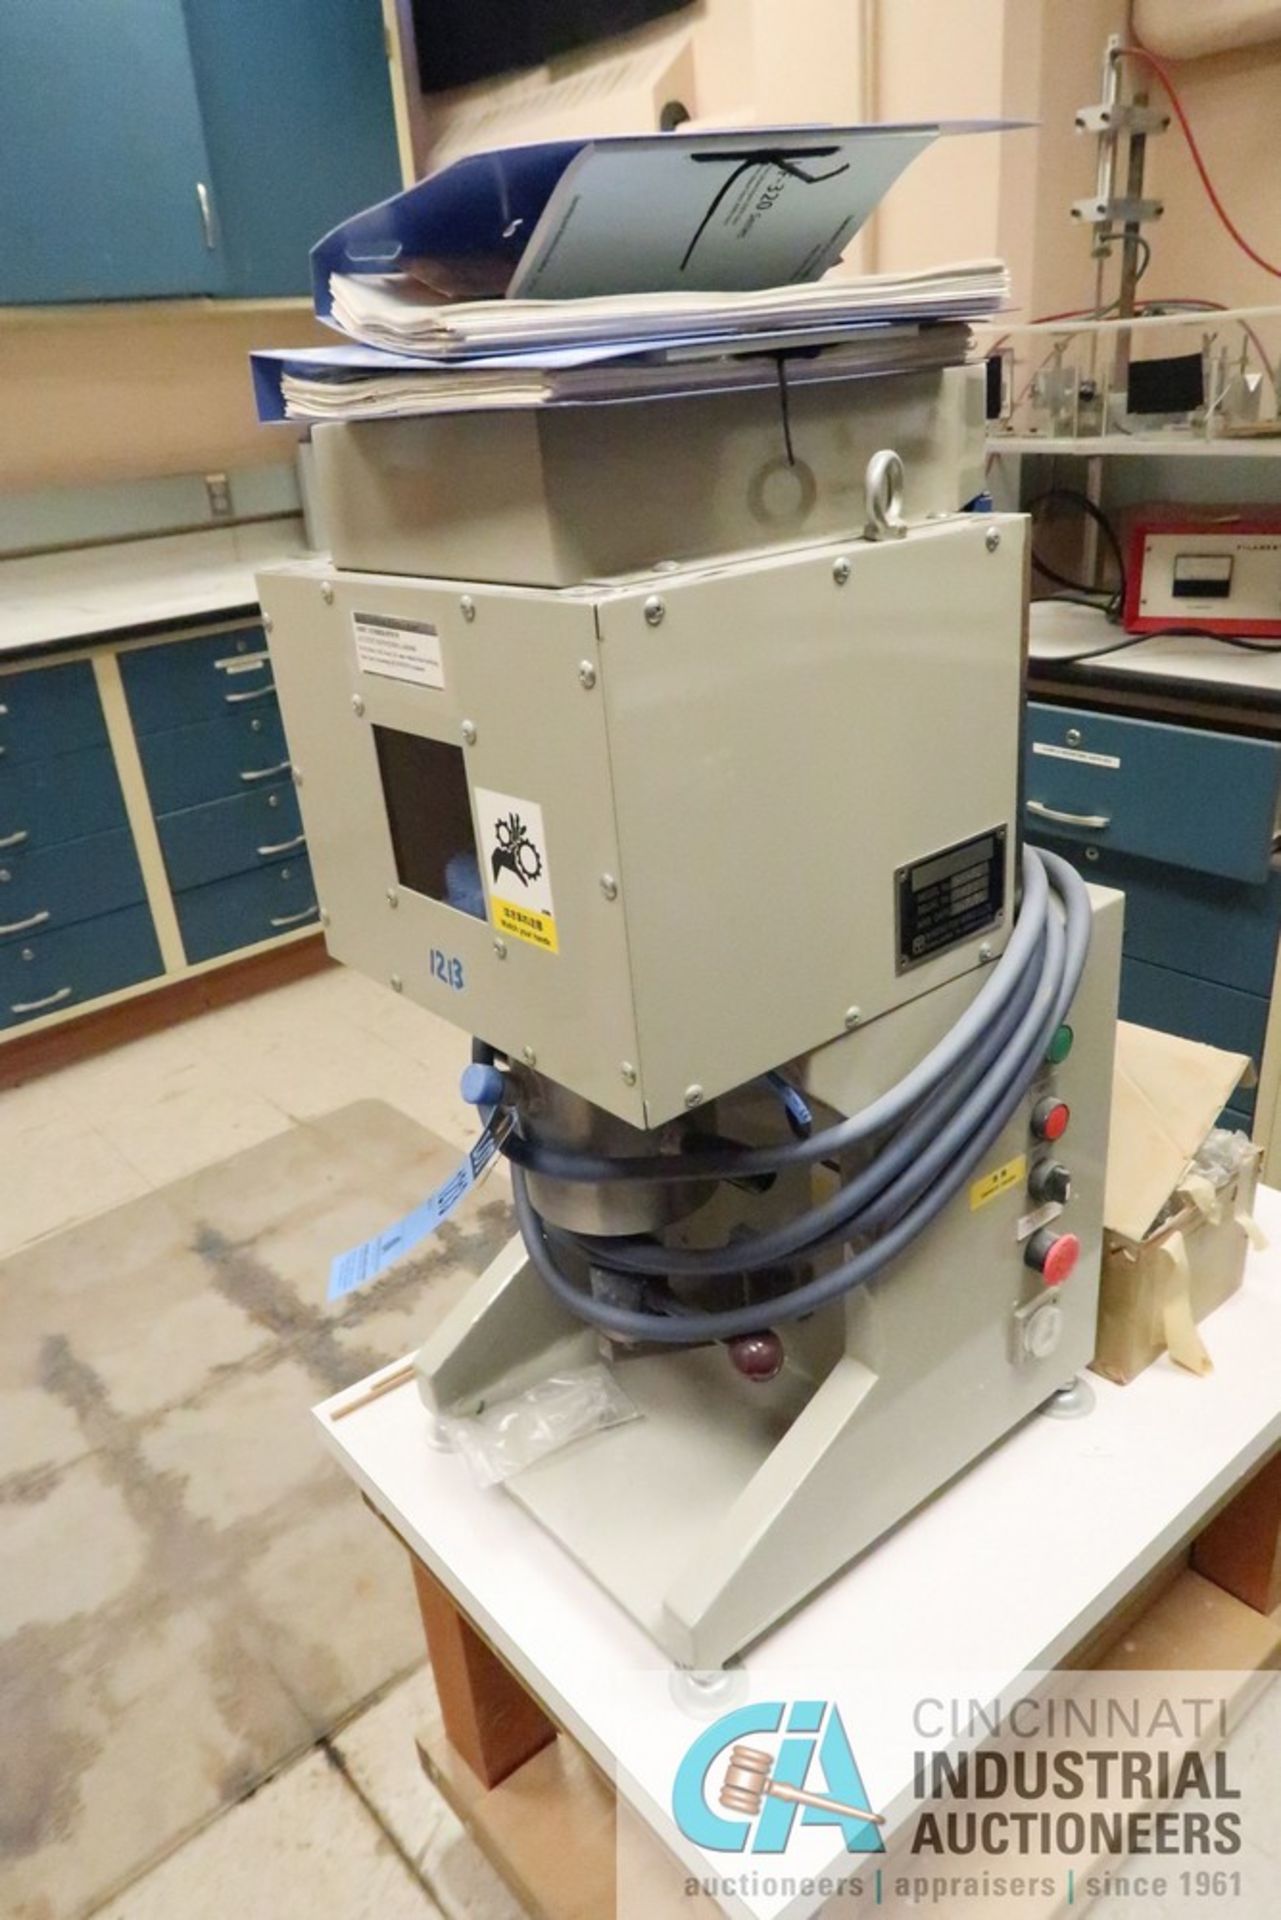 MIYAZAKI MODEL MHS-80 HIGH SPEED MIXER; S/N 0423 (ROOM 29) - Located in the basement - Image 2 of 3